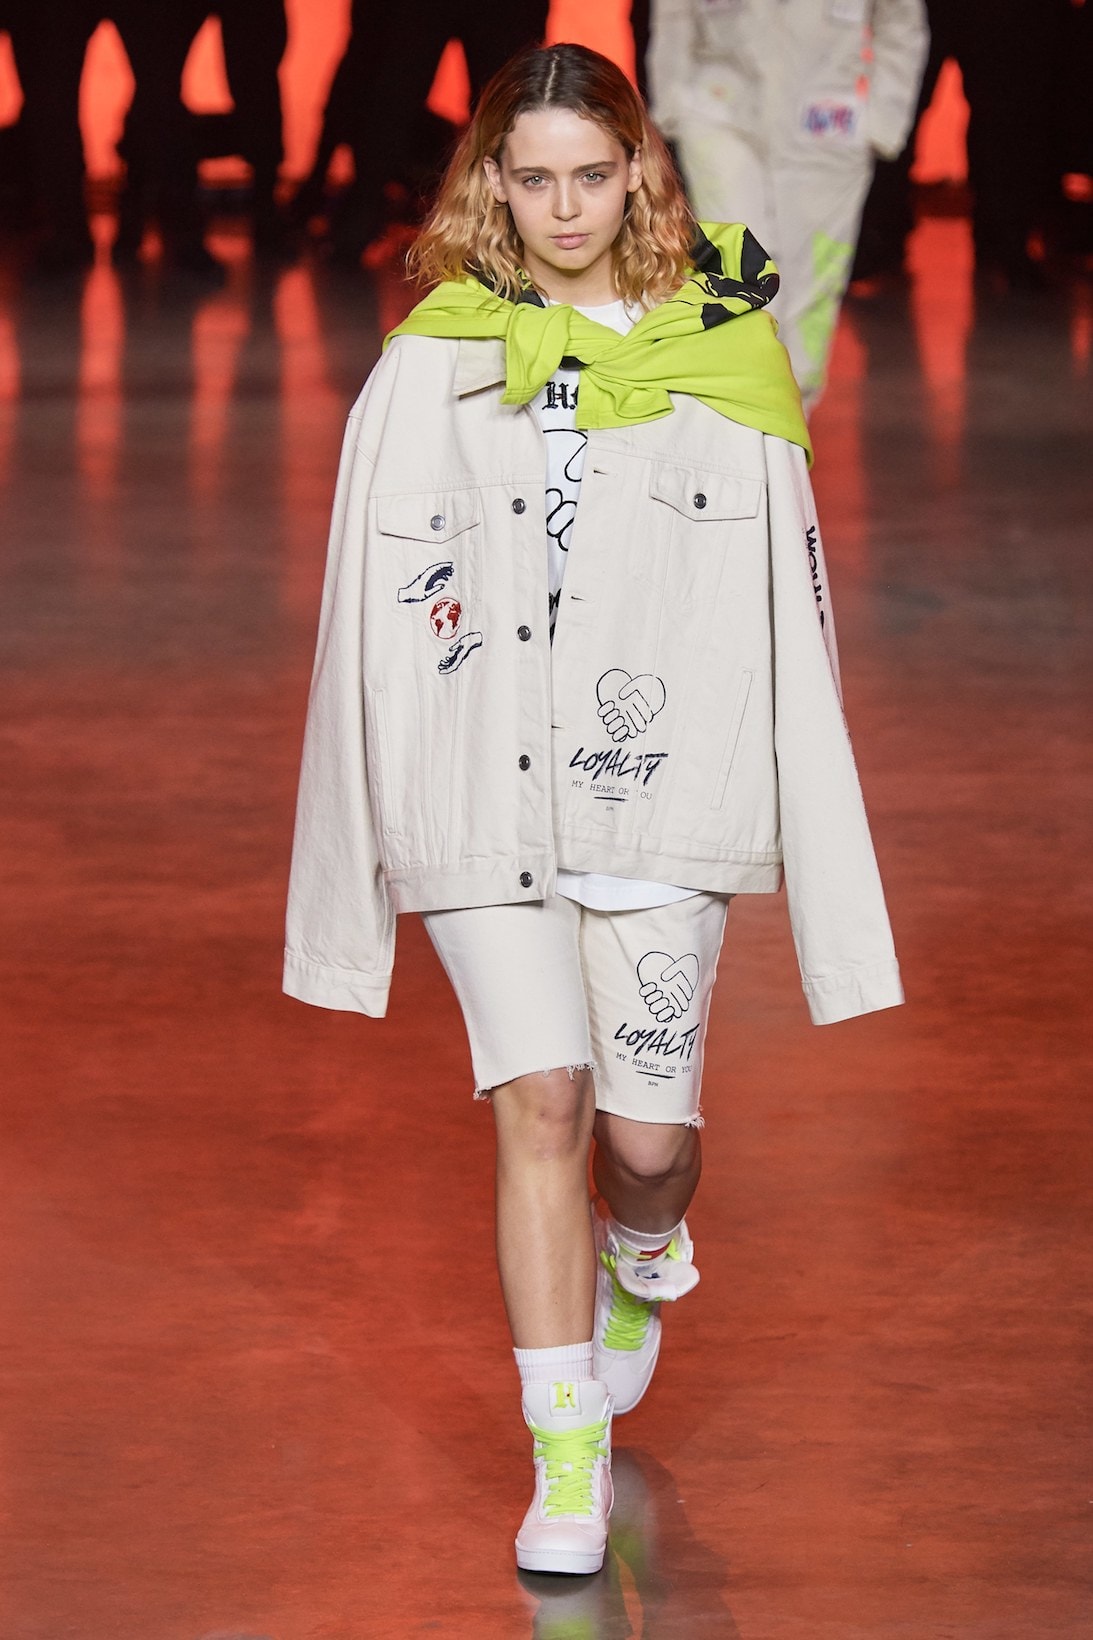 tommy hilfiger tommynow parris goebel london fashion week spring summer collection naomi campbell img models